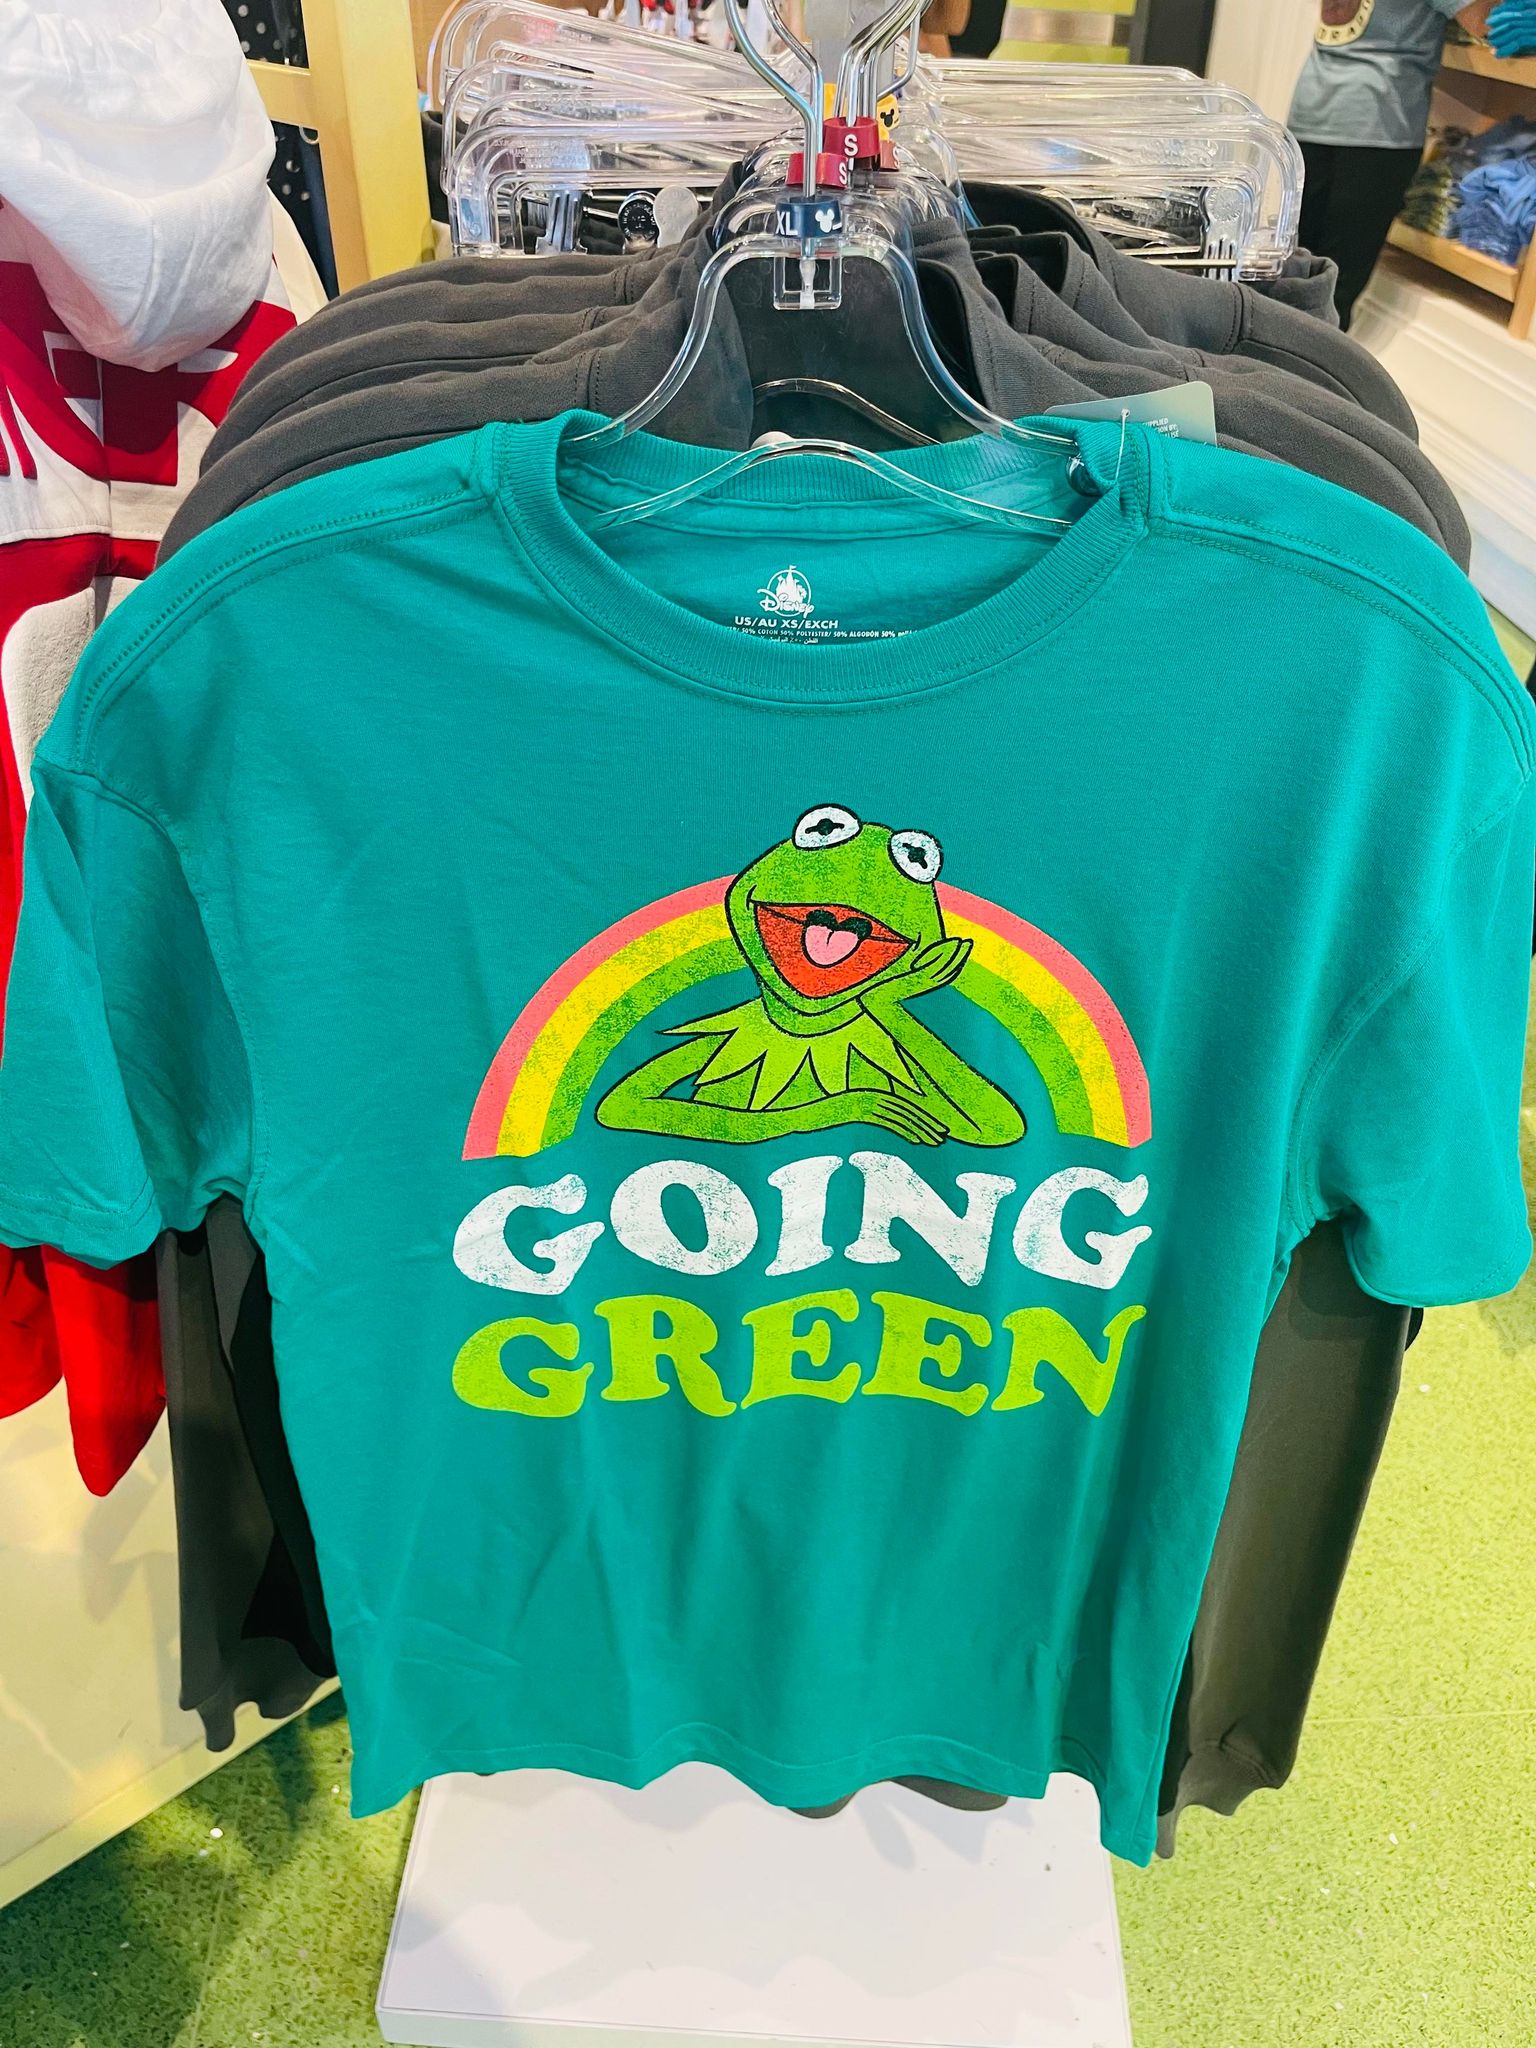 It's Easy Being Green With This Adorable Kermit Tee